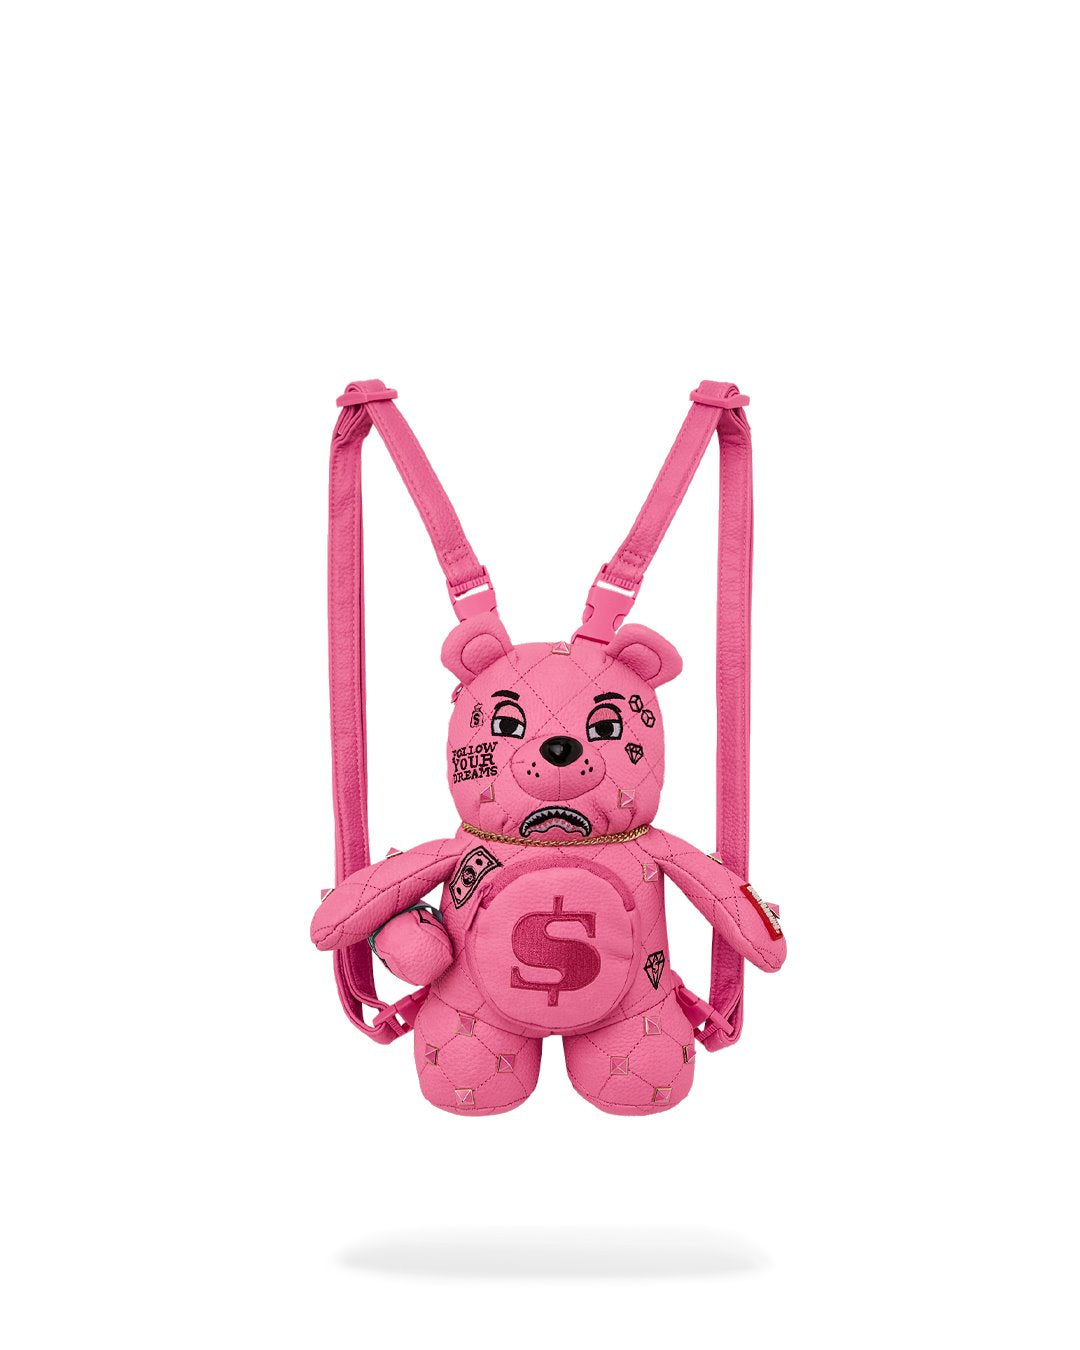 PRETTY PINK QUILTED BEAR CUB BACKPACK